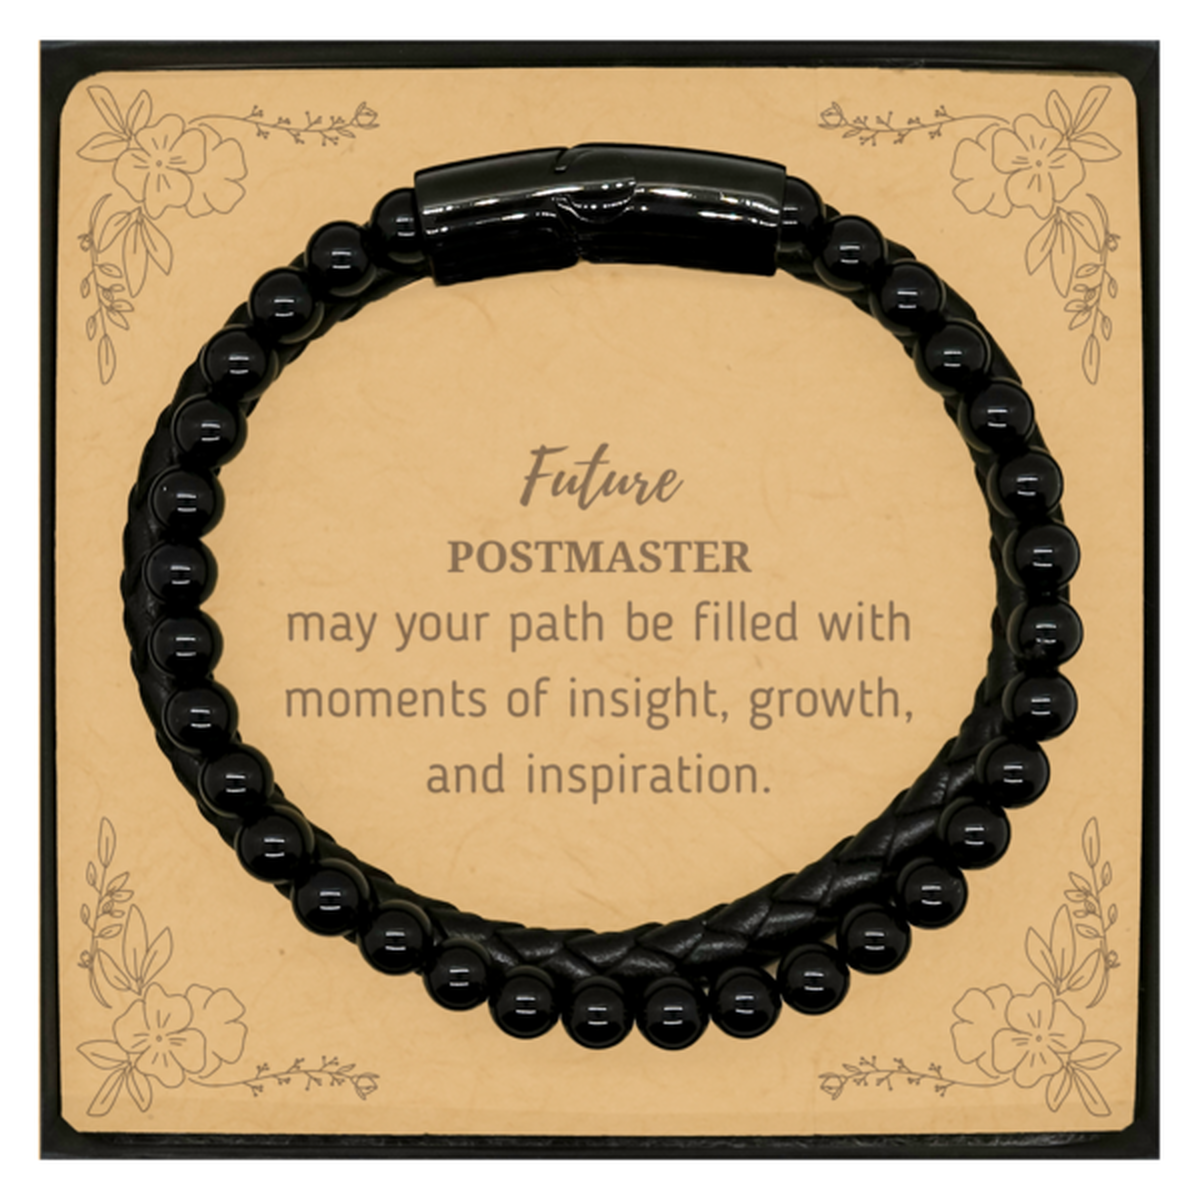 Future Postmaster Gifts, May your path be filled with moments of insight, Graduation Gifts for New Postmaster, Christmas Unique Stone Leather Bracelets For Men, Women, Friends